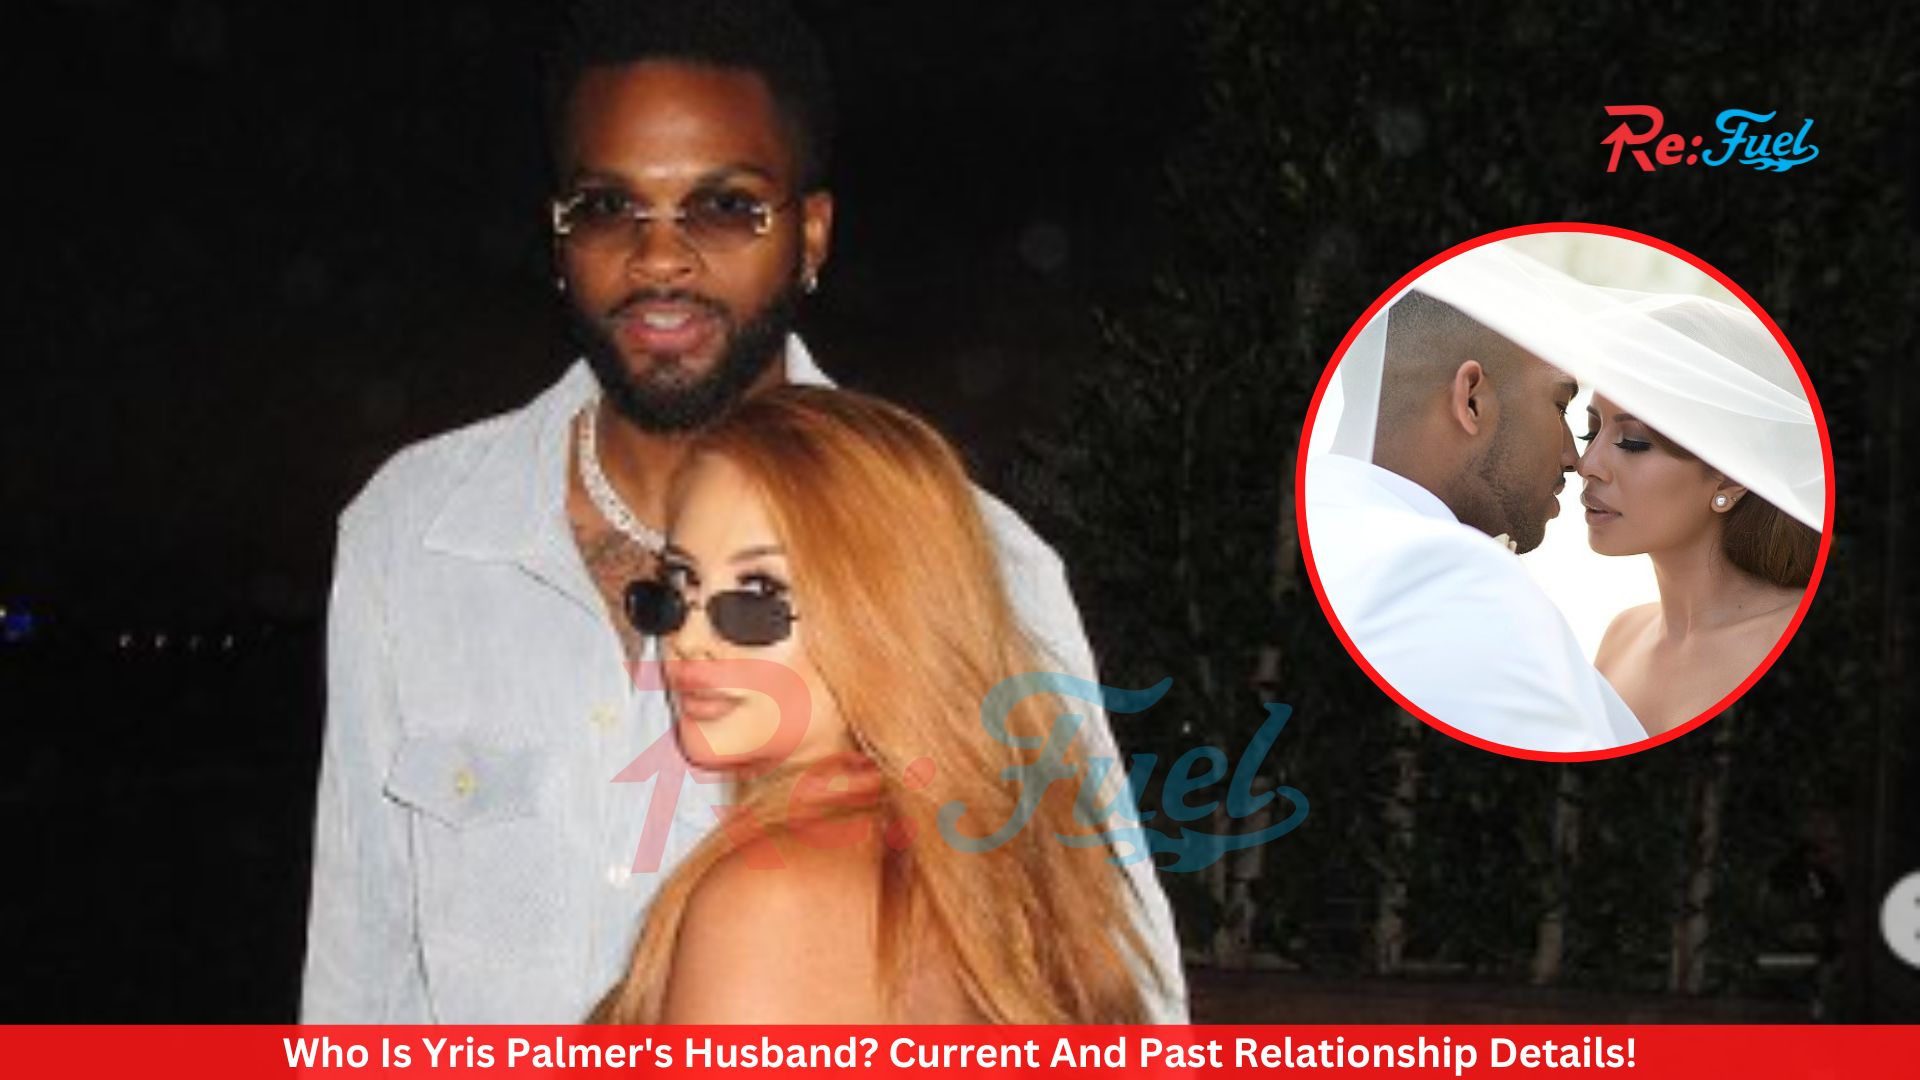 Who Is Yris Palmer's Husband? Current And Past Relationship Details!